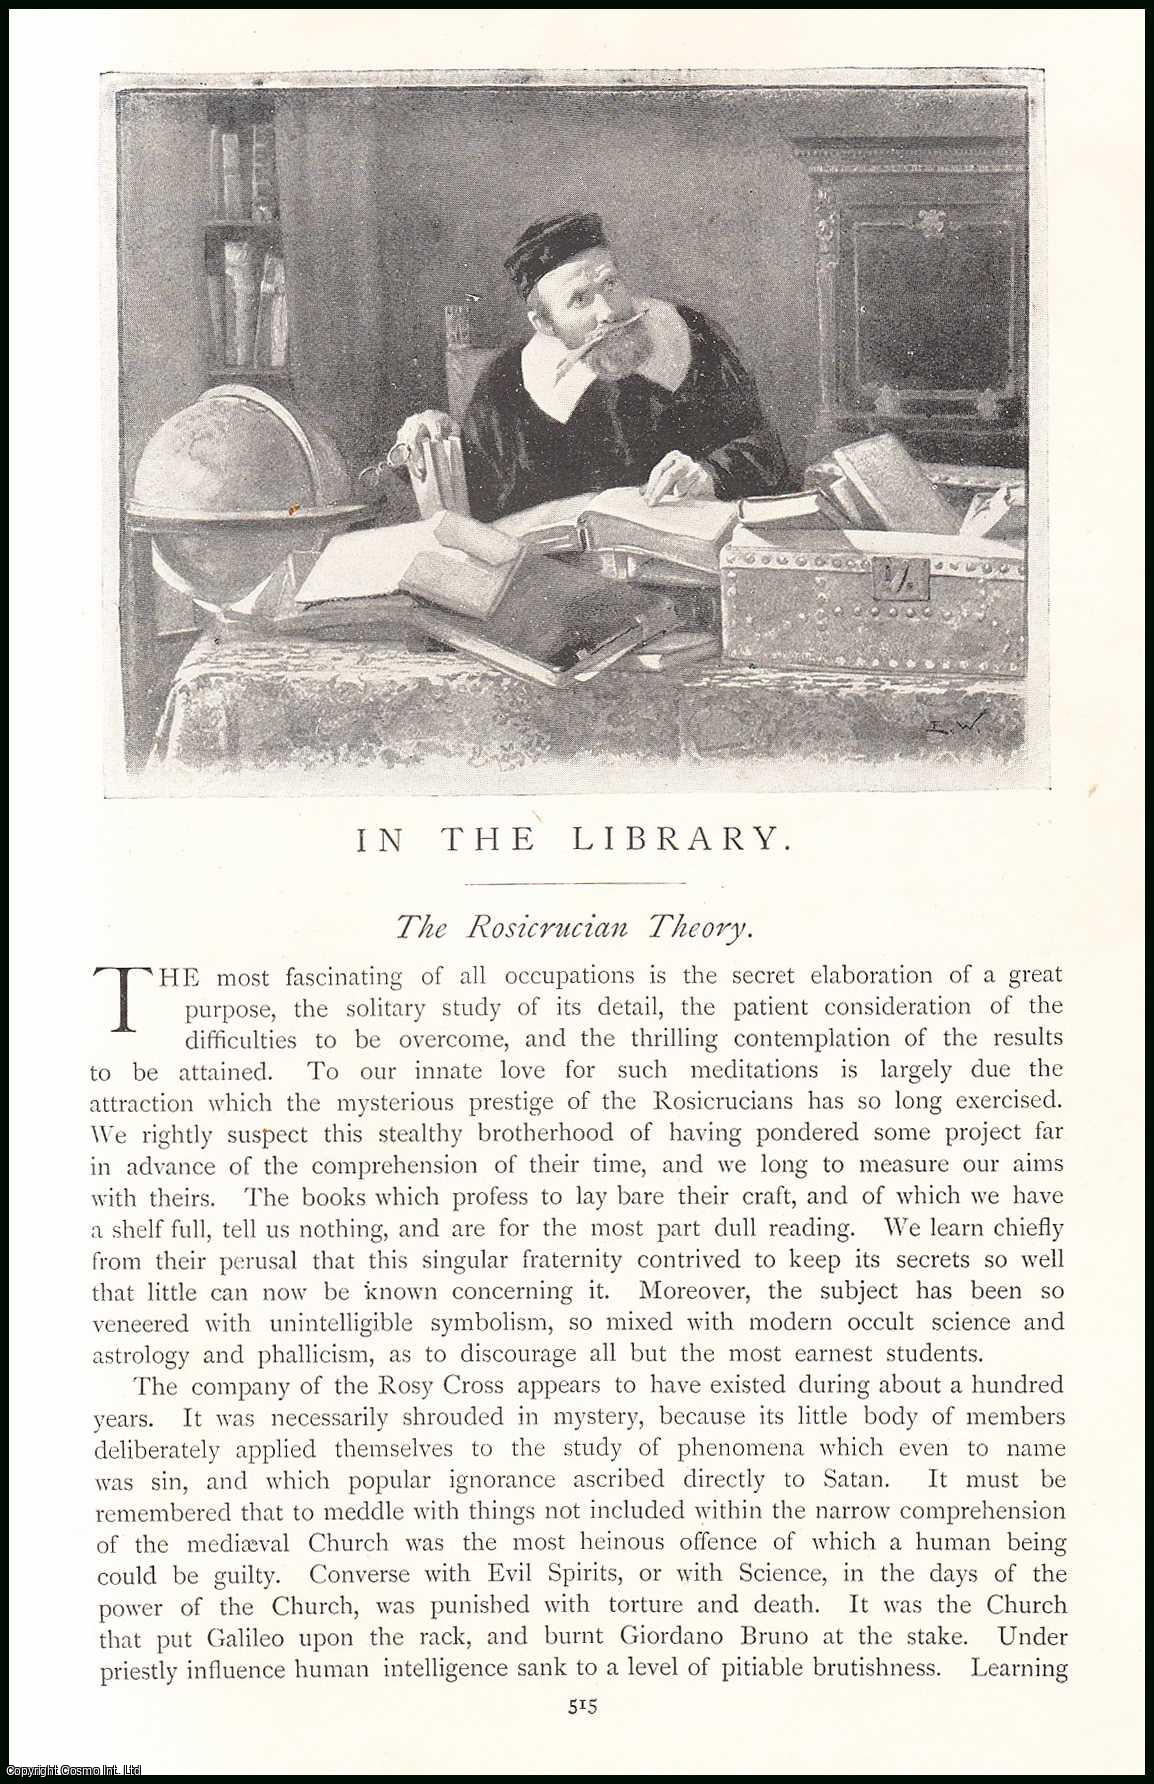 W.W.A. - The Rosicrucian Theory ; Anglo-Saxon Federation & Italian Despots of the Quattro Cento. In the Library. An uncommon original article from the Pall Mall Magazine, 1894.